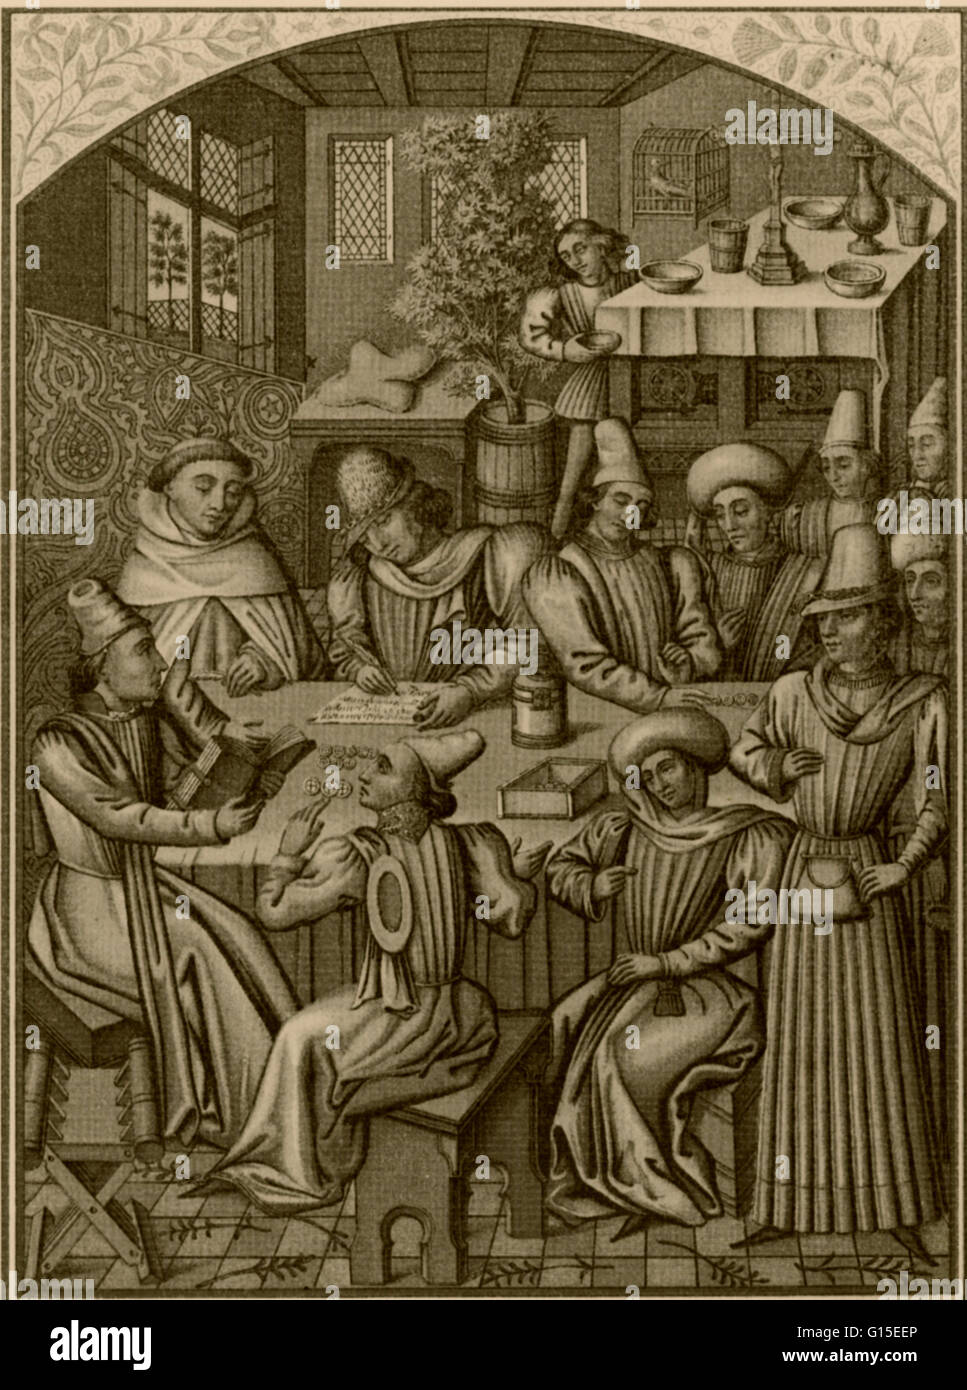 The settlement of year end accounts by a Rouen charity in 1466. Methodical adjustment of credit and cash emerged as a vital part of financial techniques in 14th and 15th century Europe. Stock Photo